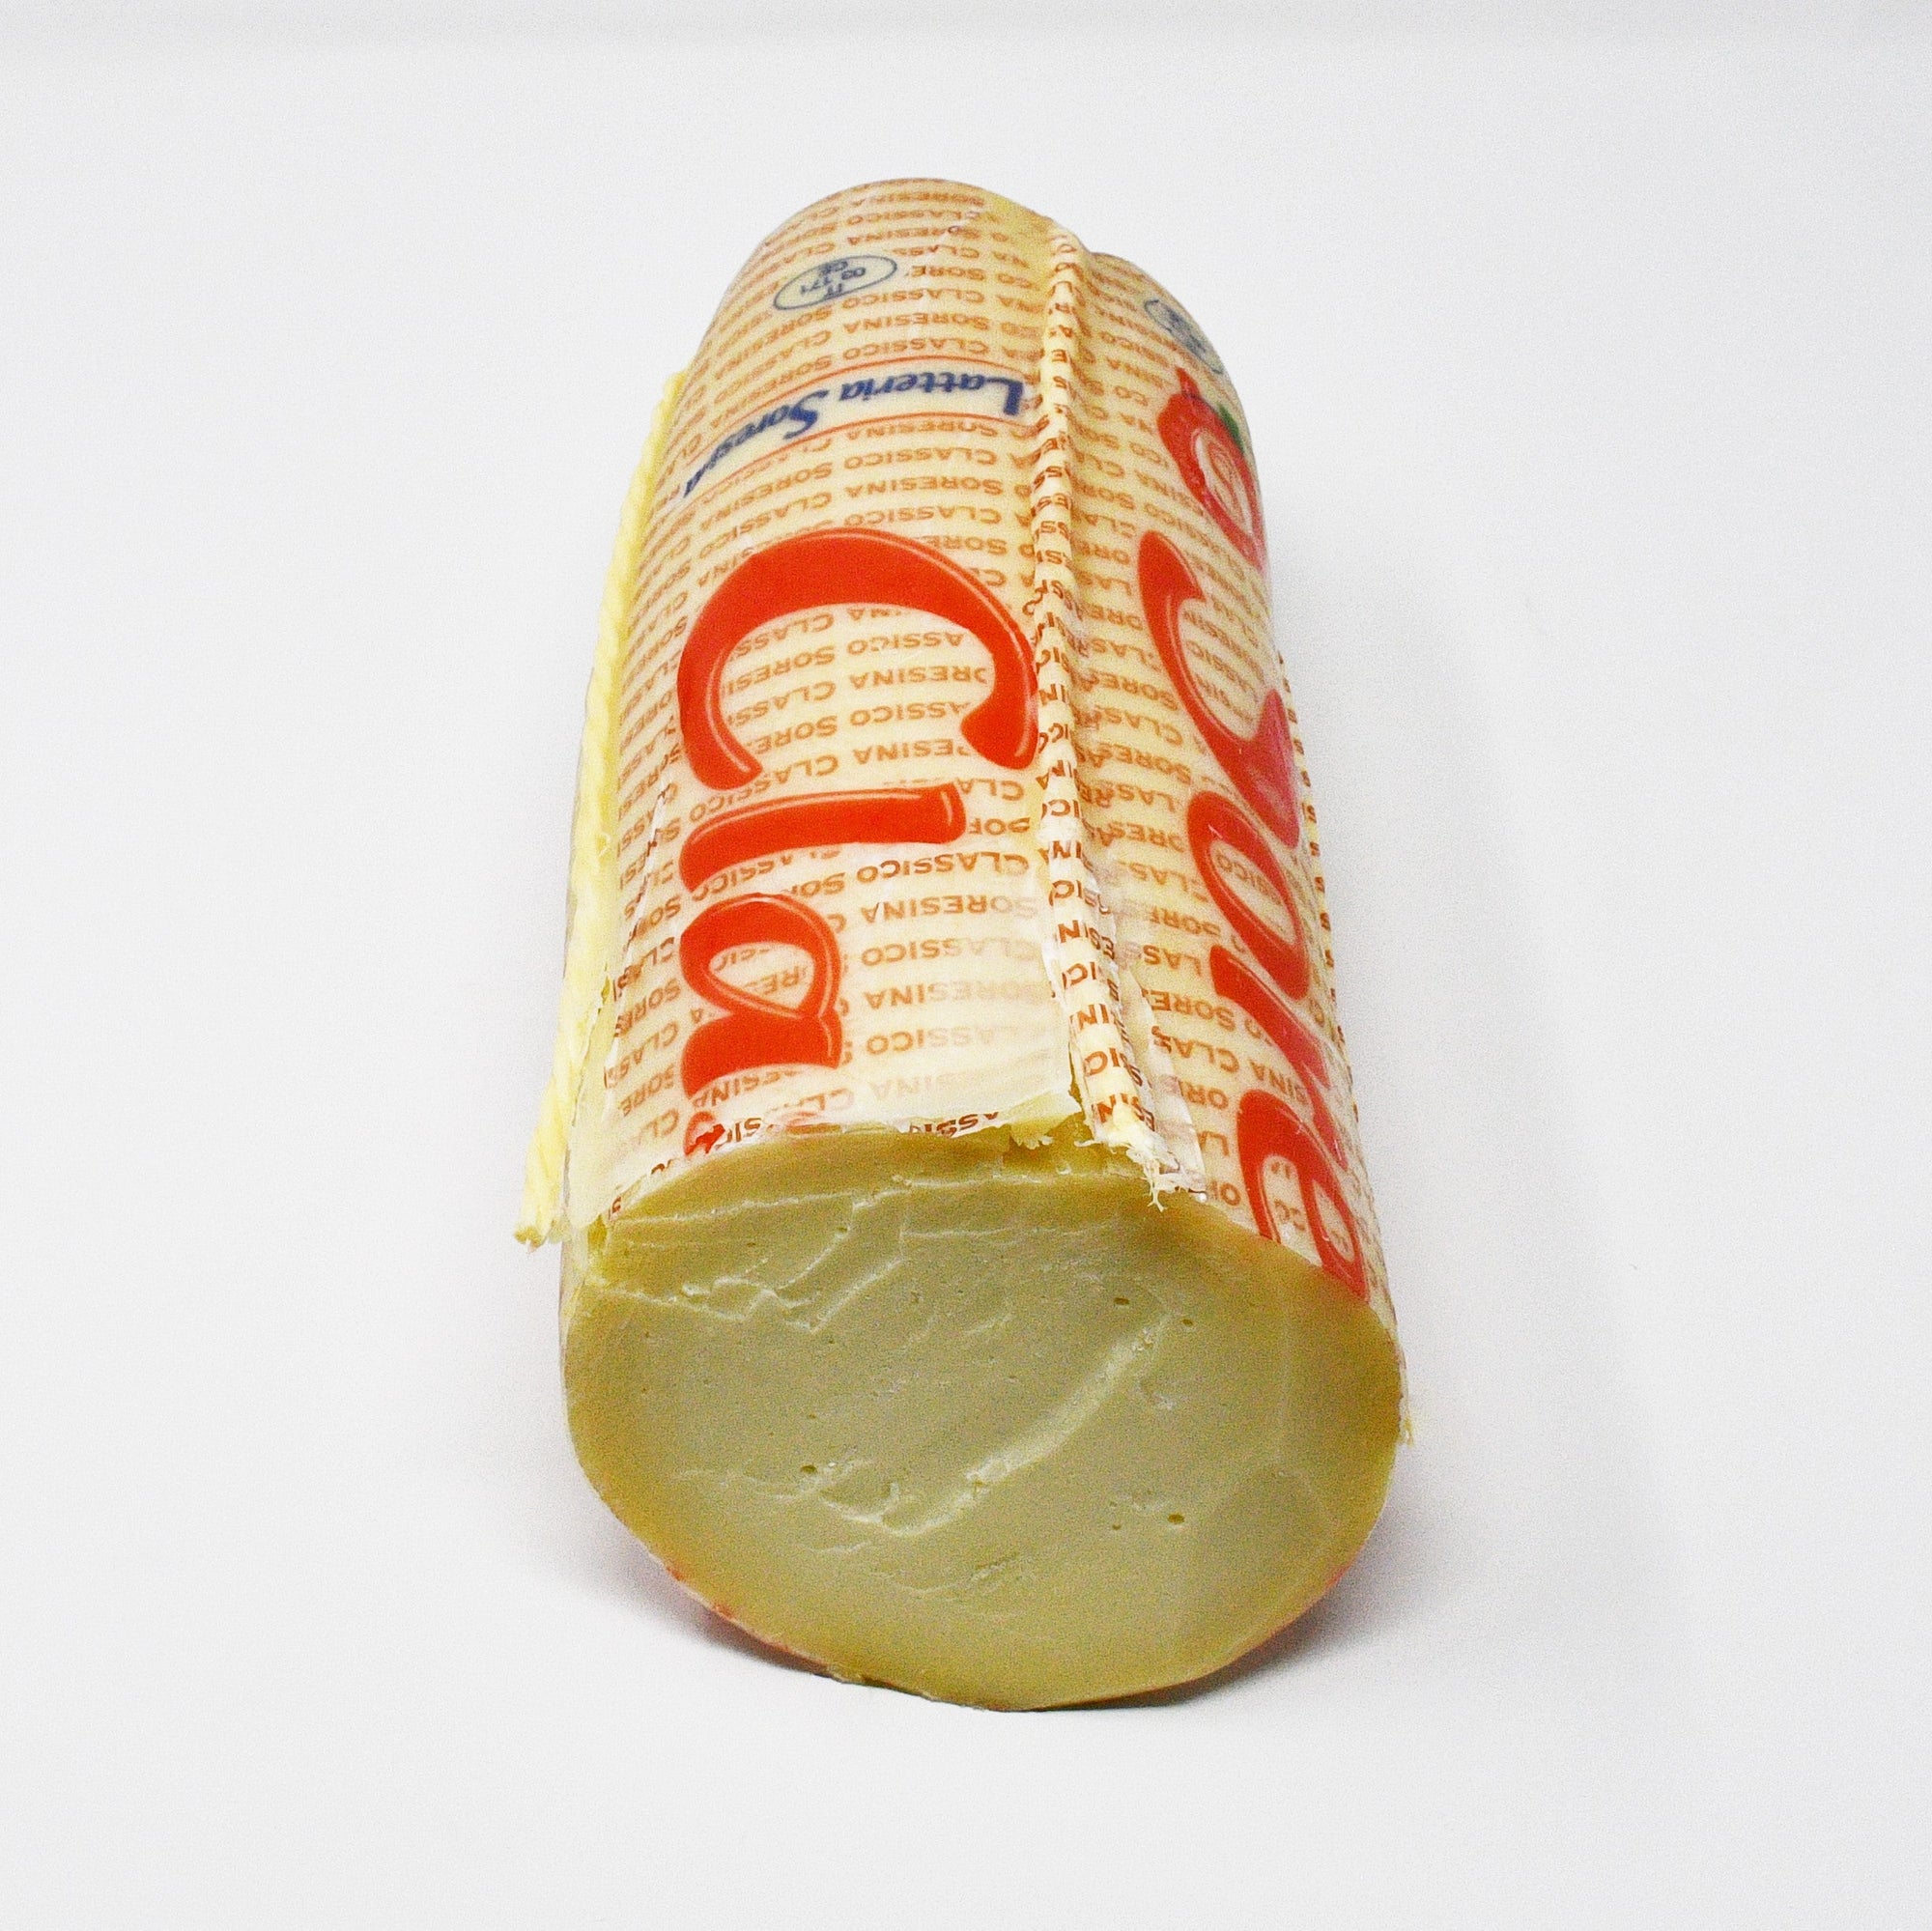 PROVOLONE DOLCE (220-250g)